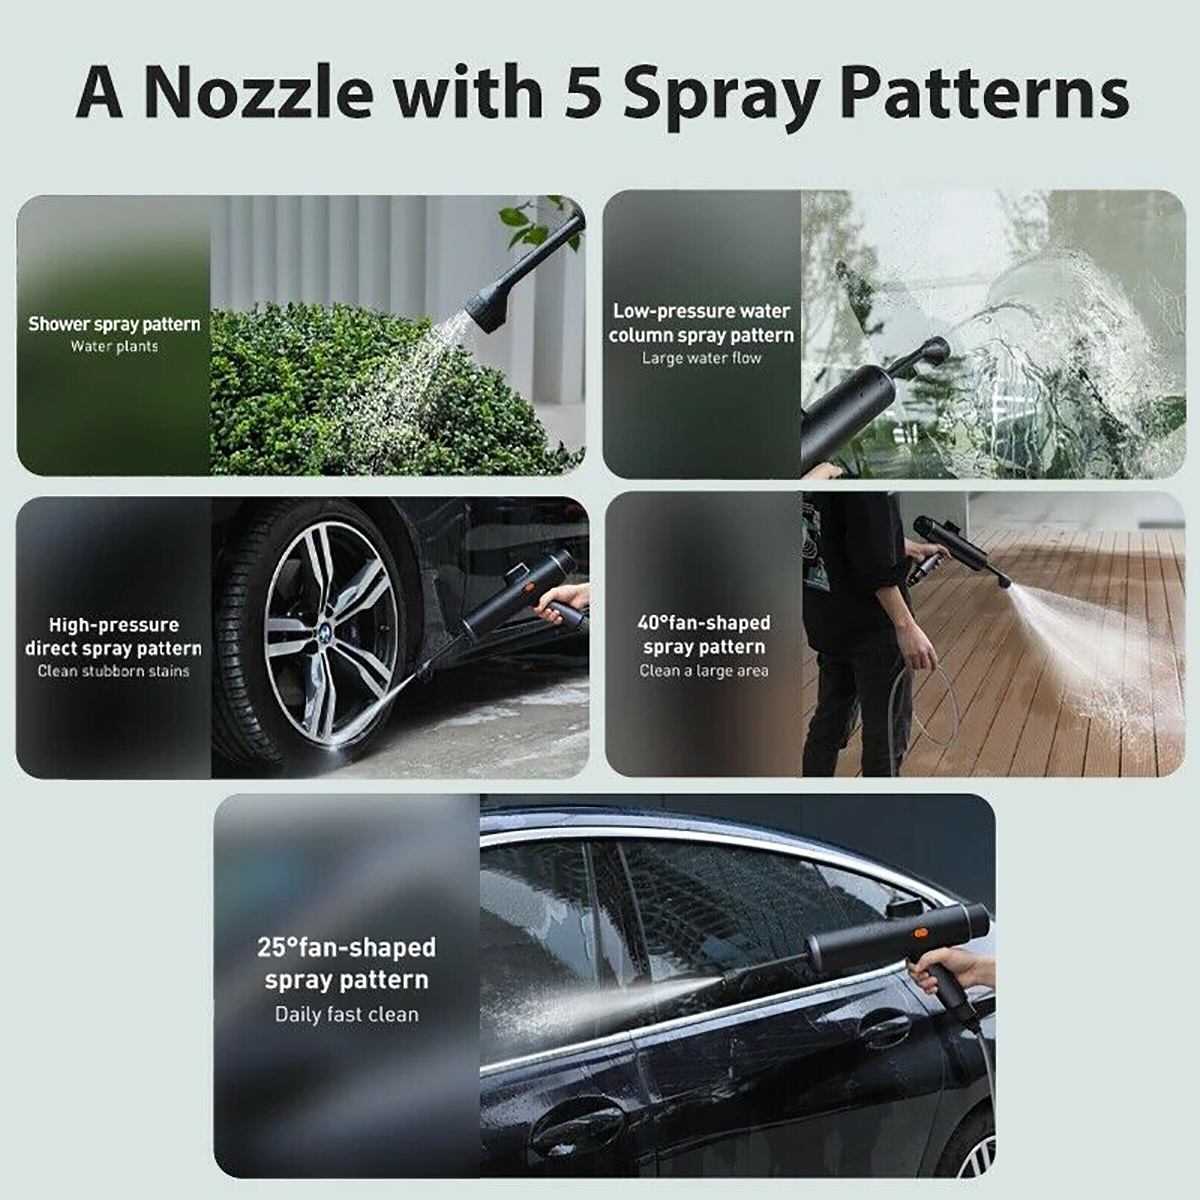 Display-Portable-Cordless-High-Pressure-Washer-Machine-USB-Rechargeable-Electric-Car-Washing-Water-S-1861681-9